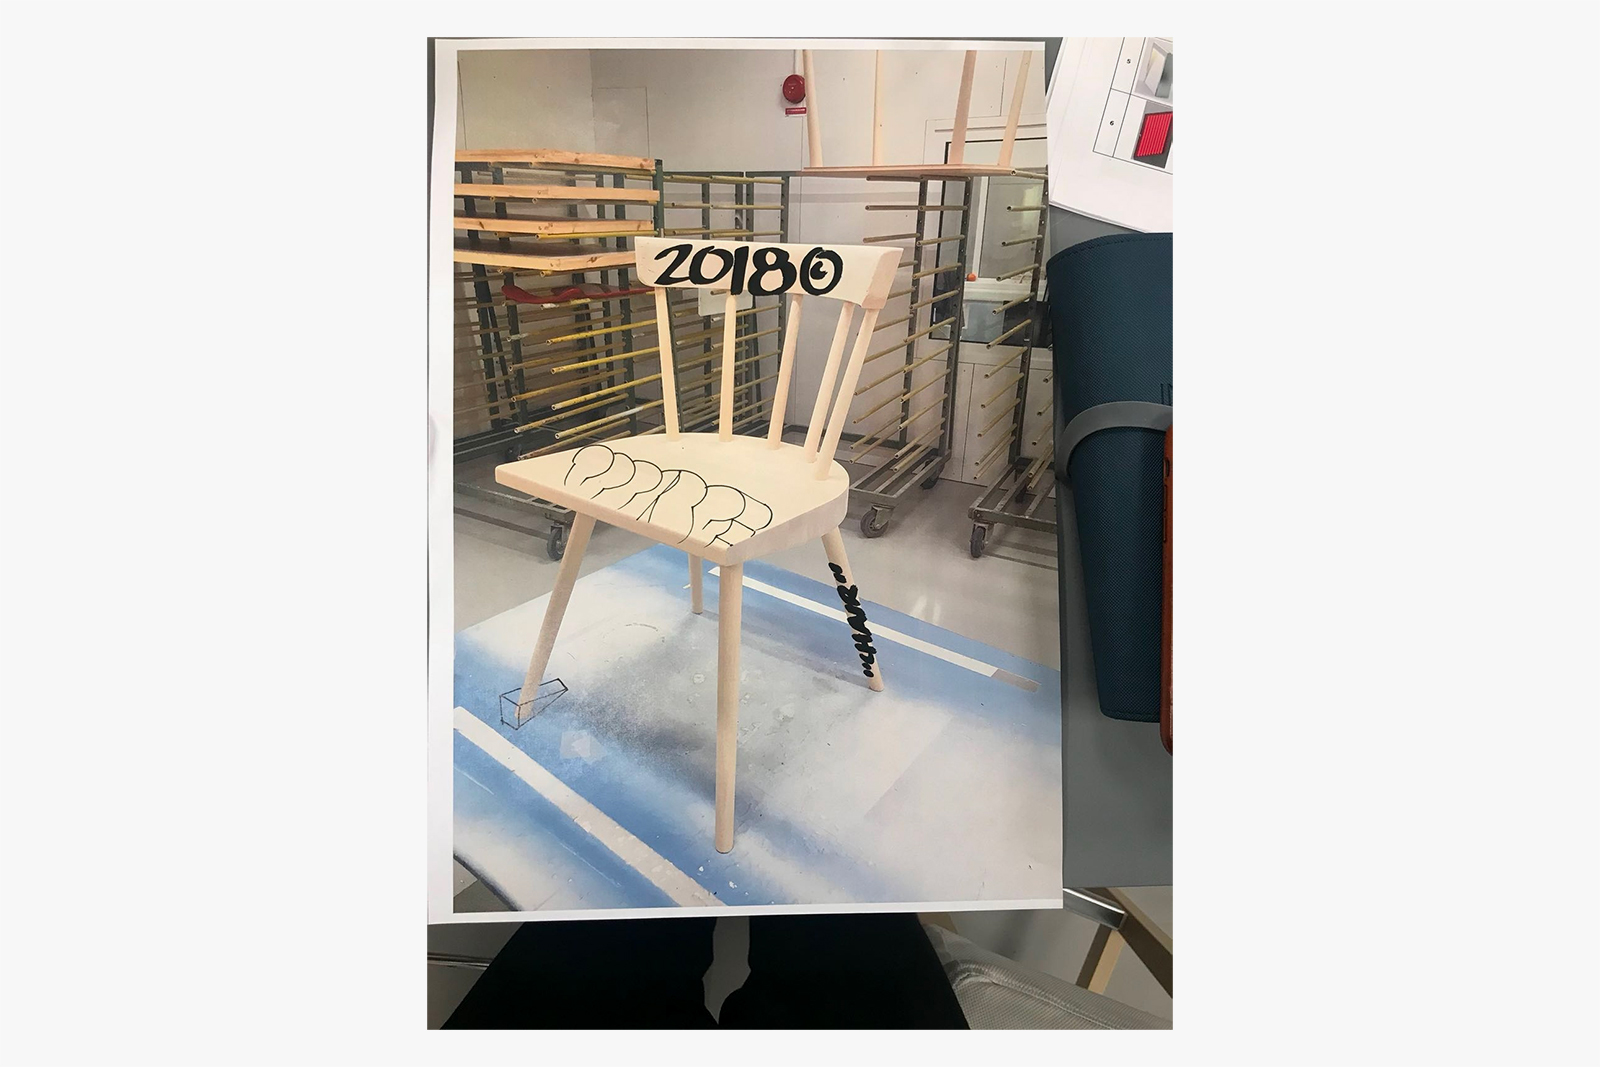 Virgil Abloh lists Customised “Doorstop Chair” for Charity Auction